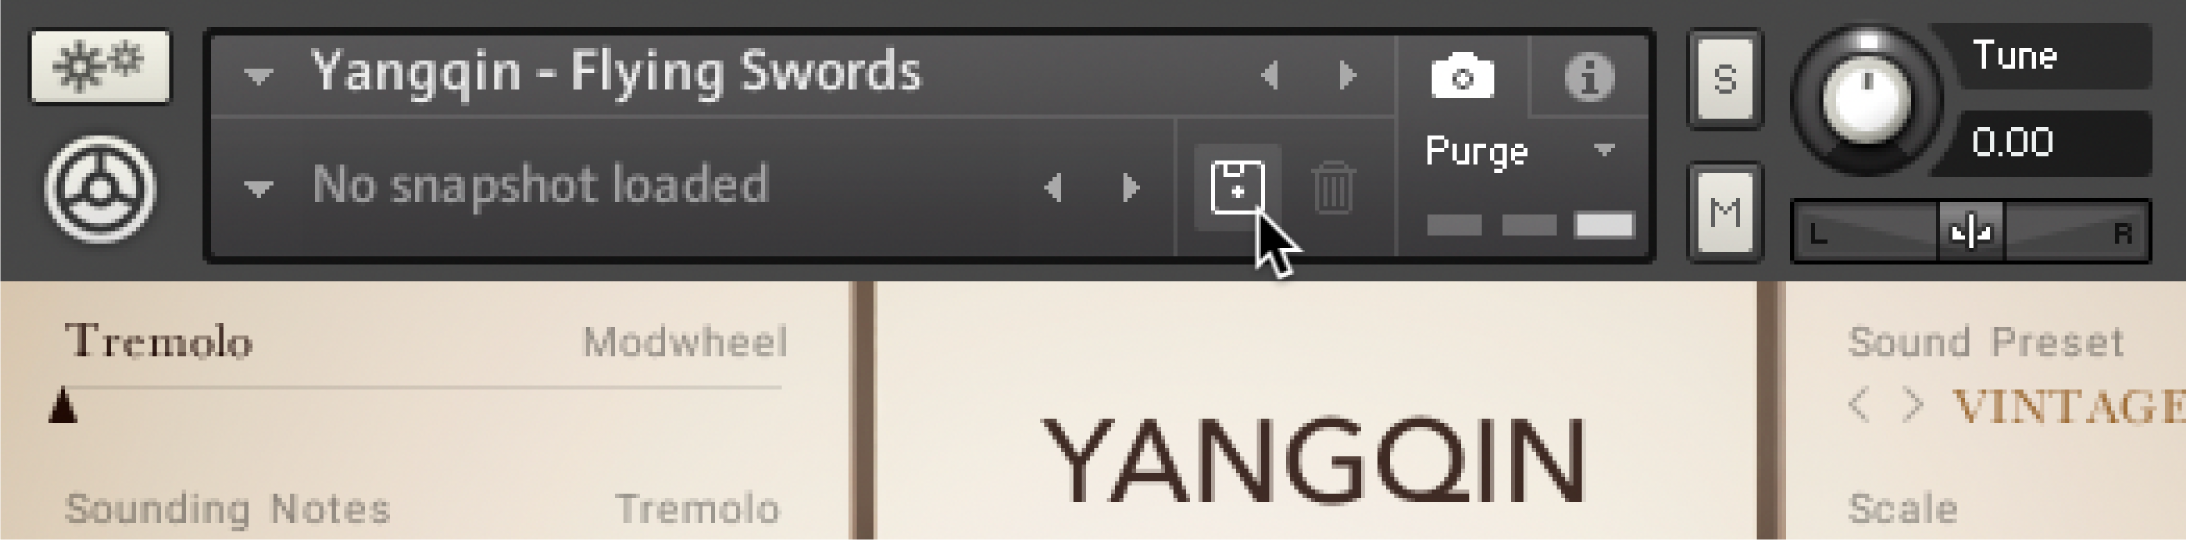 The instrument header of the Yangqin instrument. The mouse cursor is hovering over a disc icon to save a user preset.